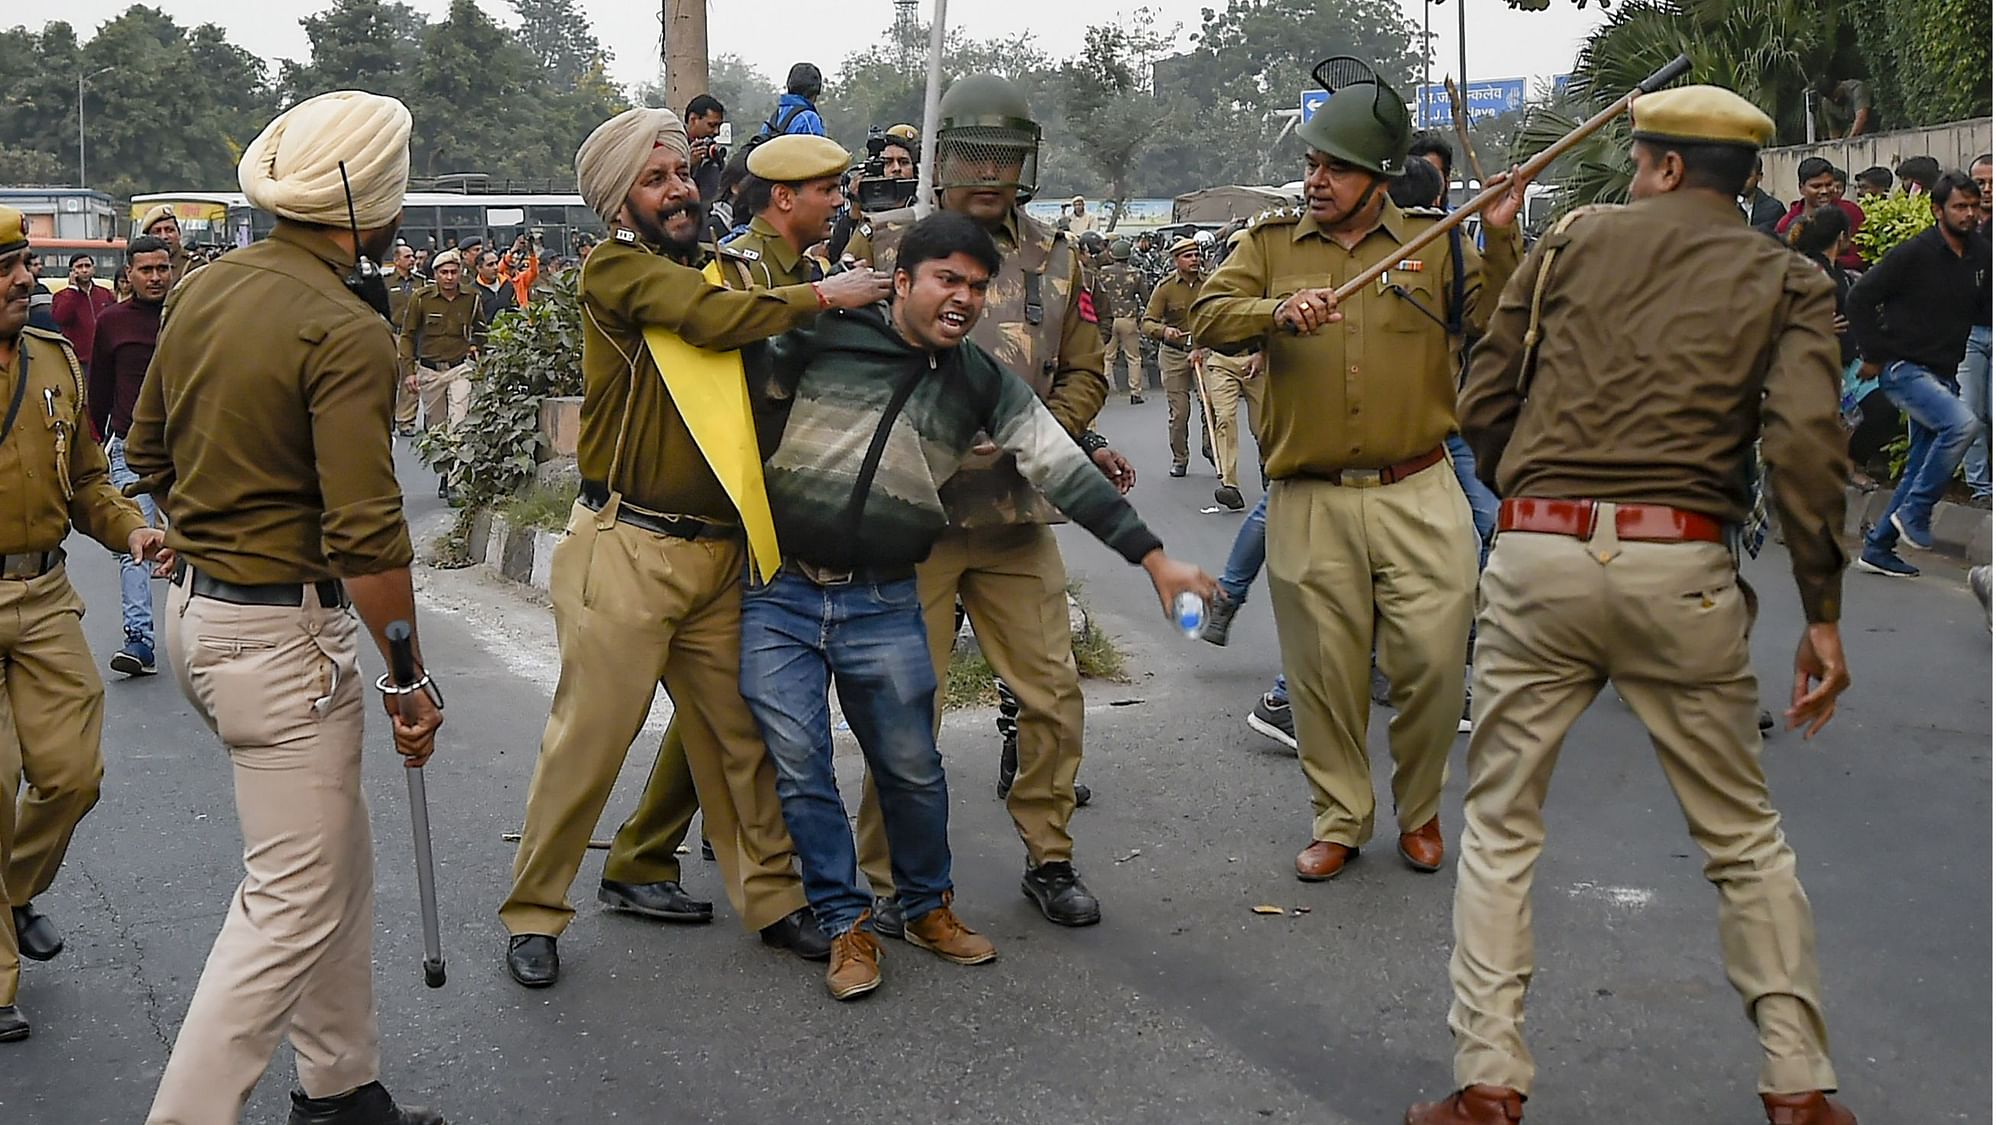 JNU students engaged in a scuffle with the police during their march from the university campus to Rashtrapati Bhavan on Monday, 9 December.